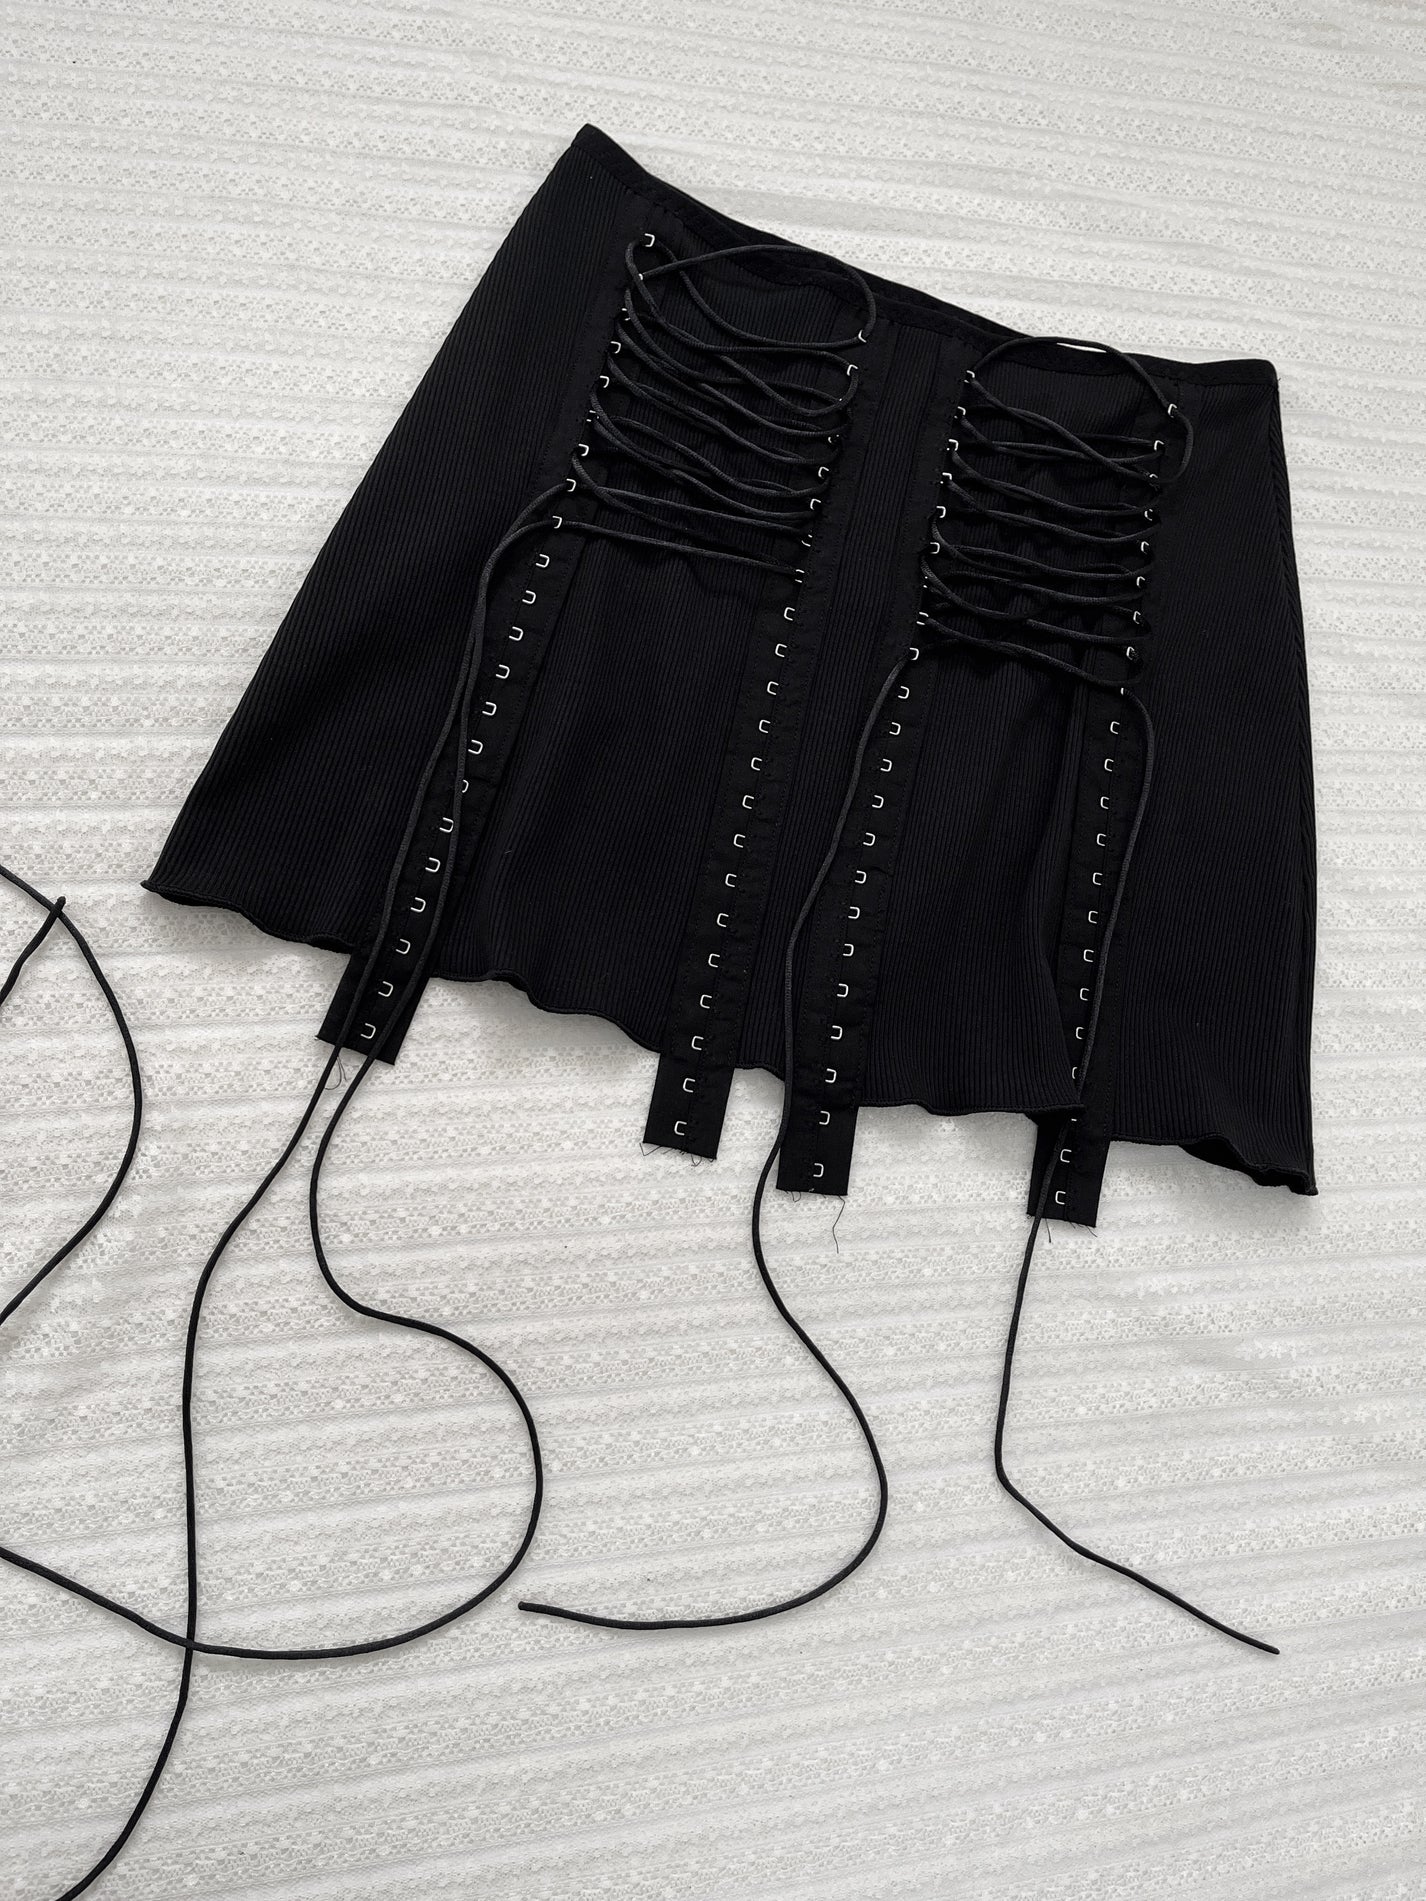 Black Skirt with Corset Lacing | Slow Fashion by Hopeless Lingerie